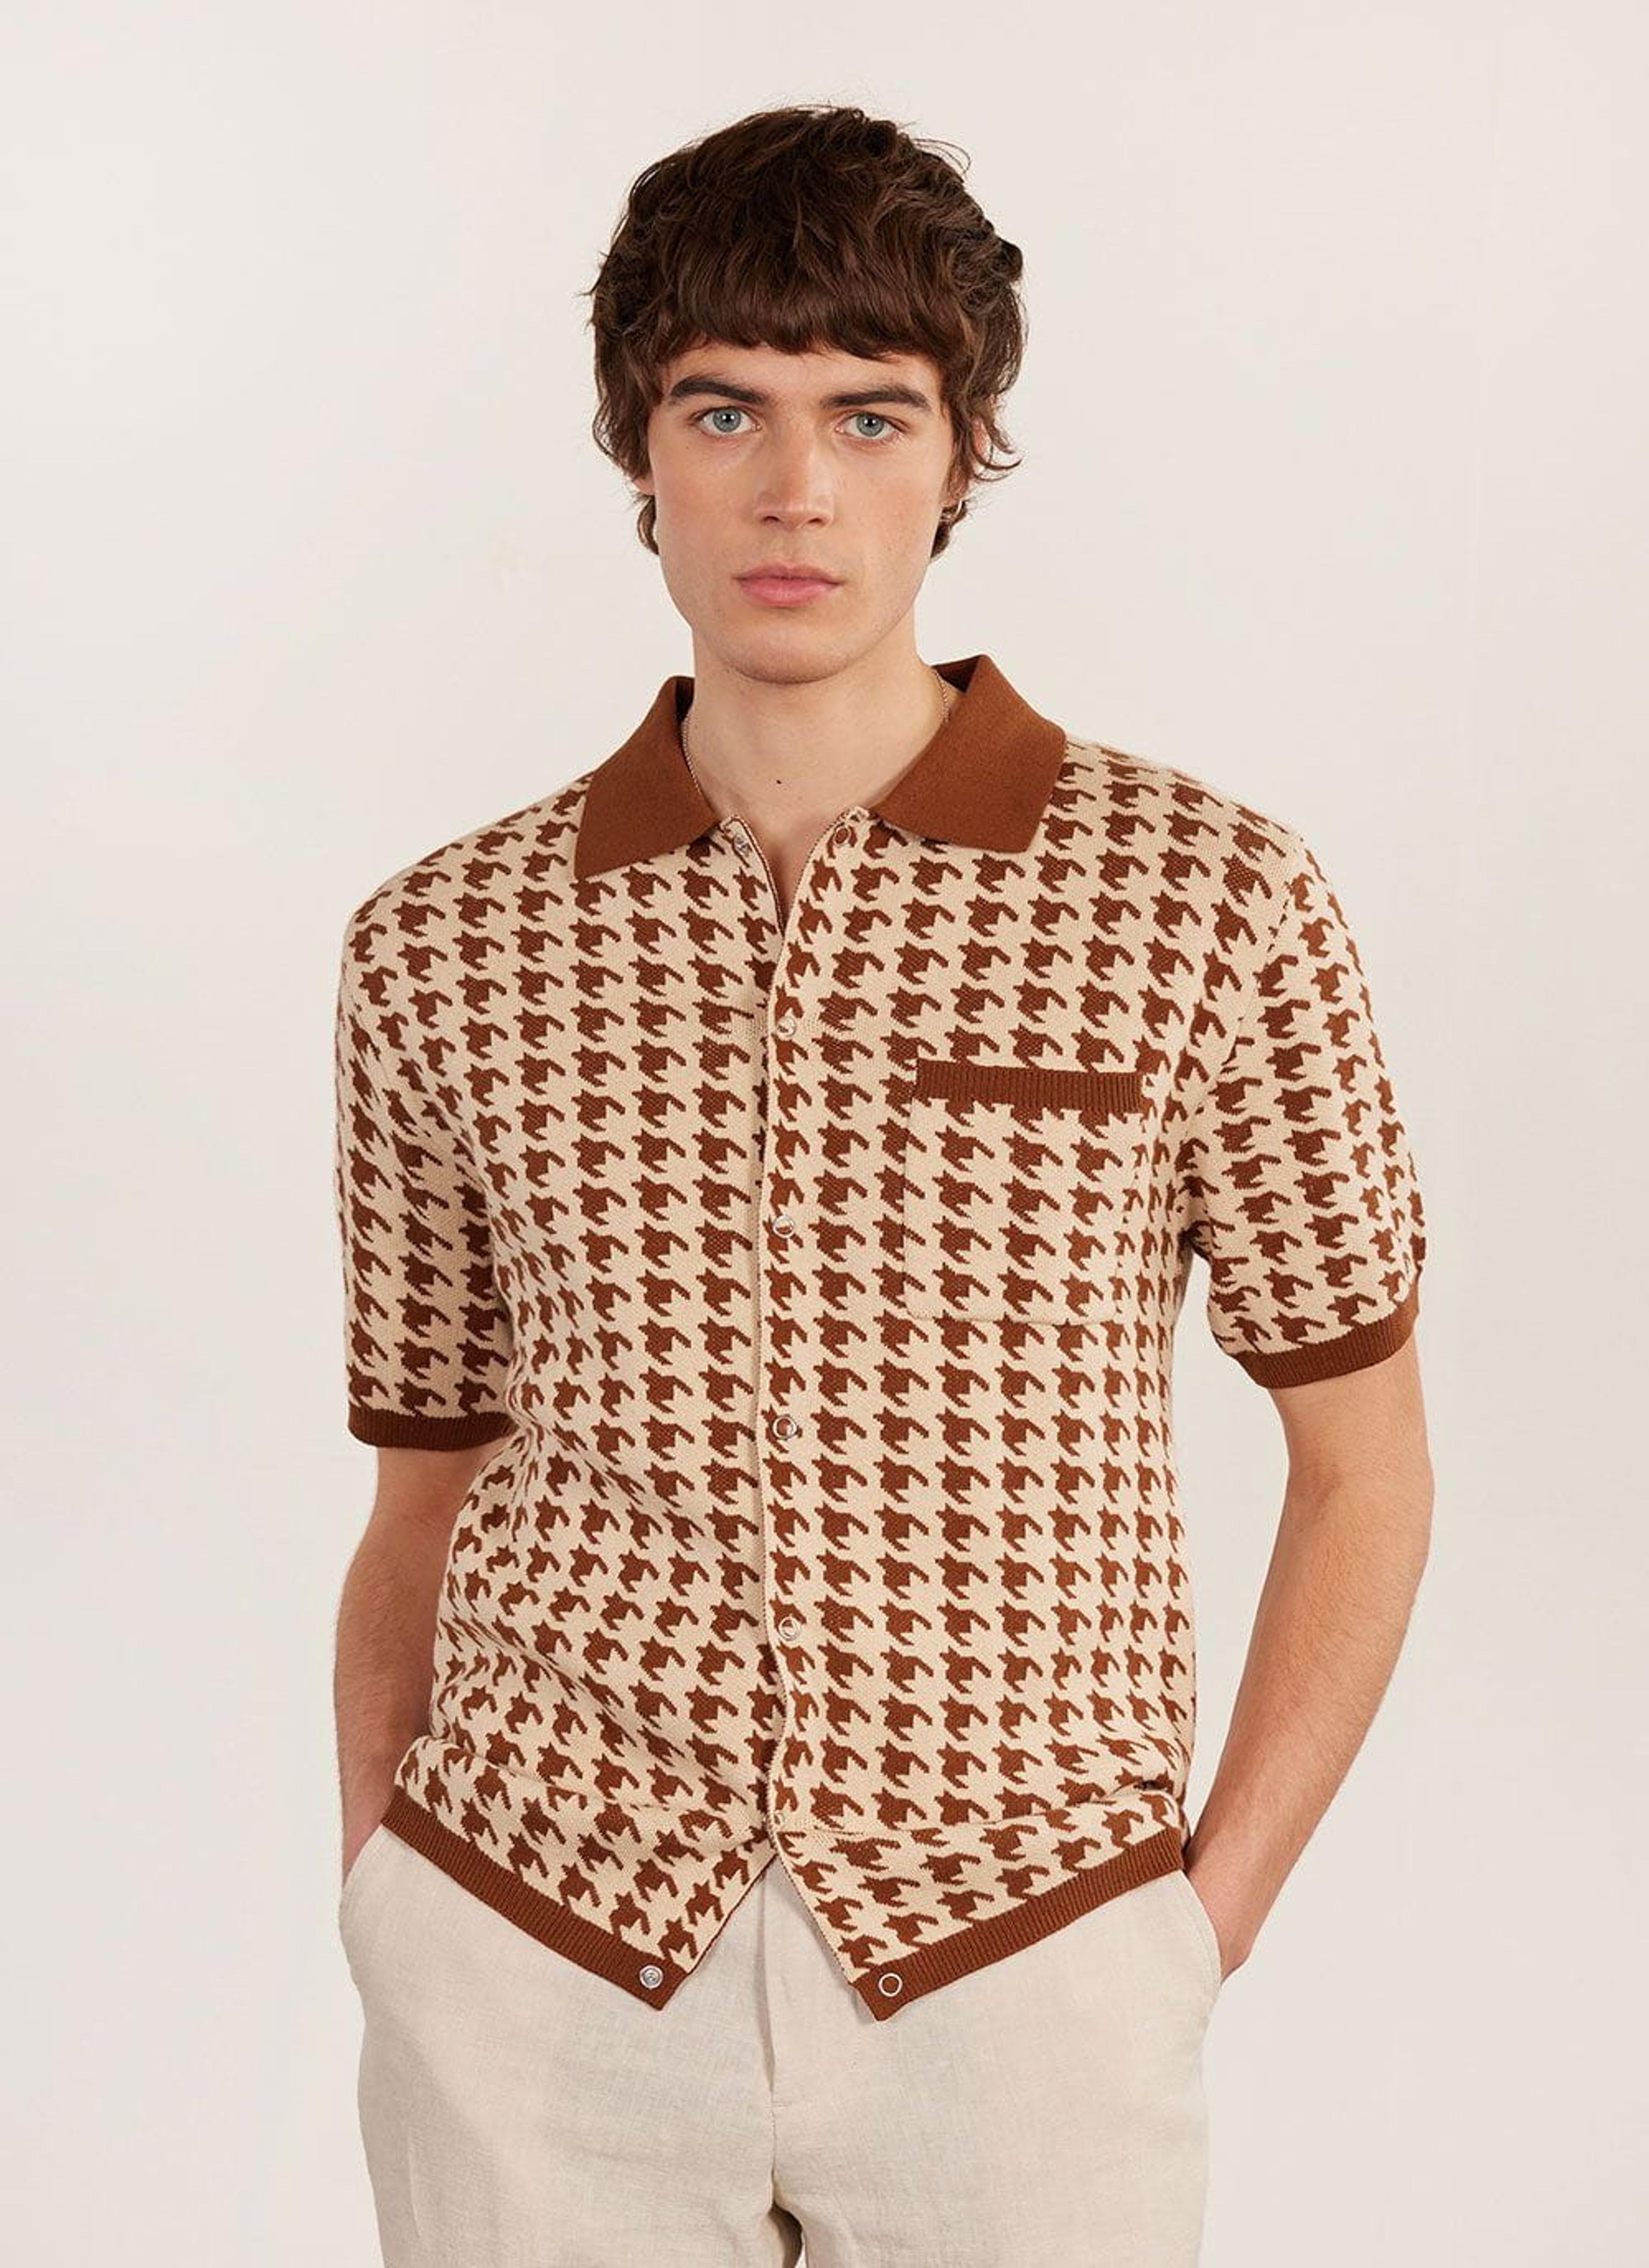 Houndstooth Knitted Shirt | Percival x Ilaria | Cream with Espresso | Percival Menswear